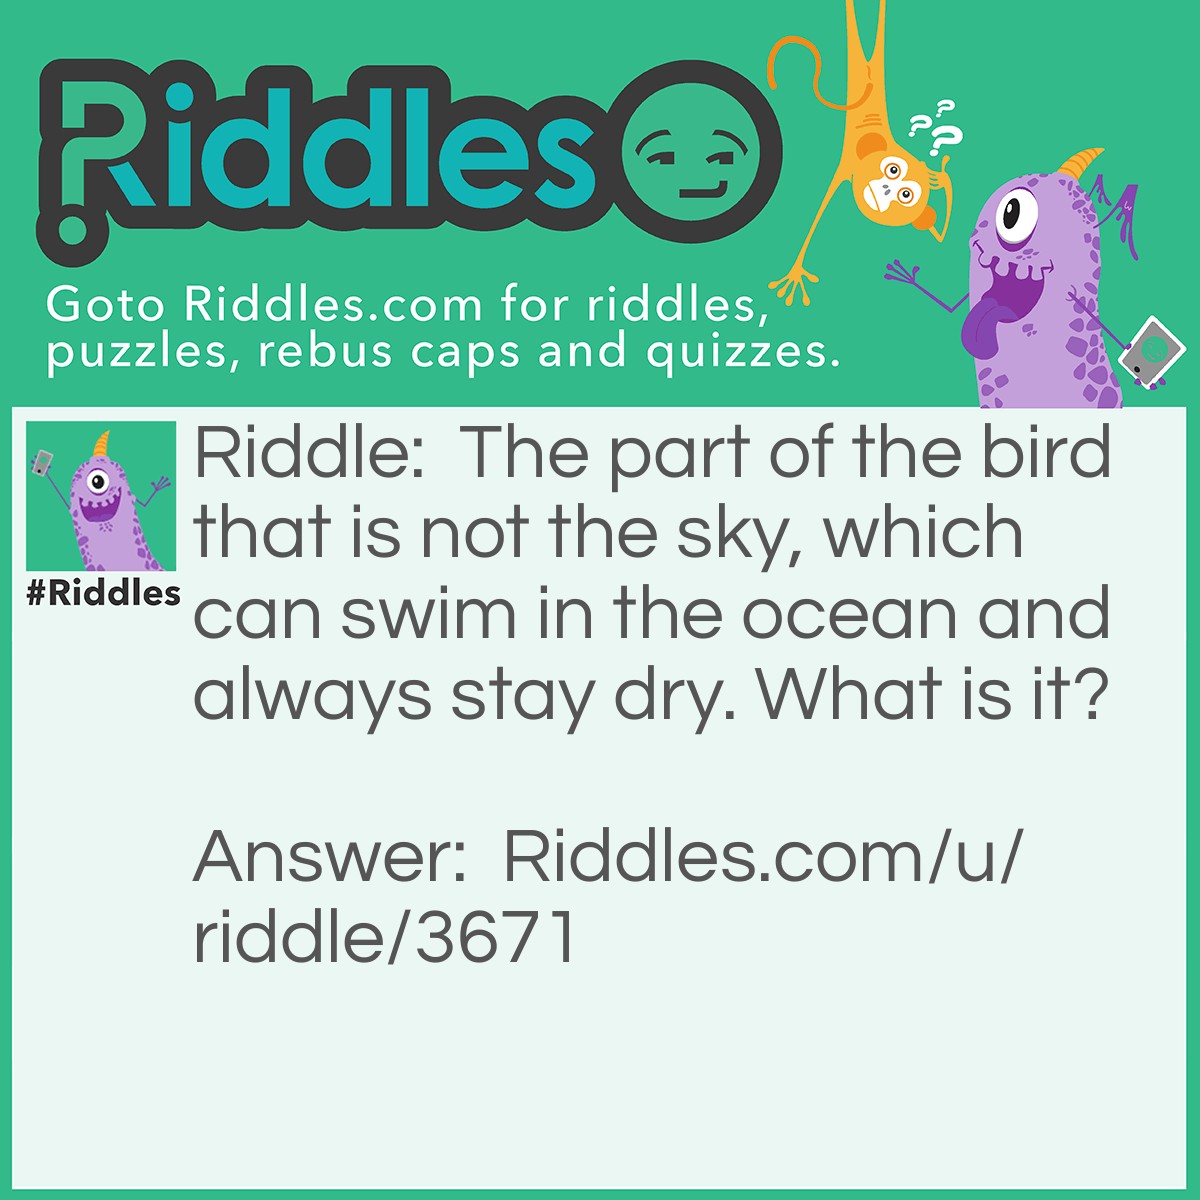 Riddle: The part of the bird that is not the sky, which can swim in the ocean and always stay dry. What is it? Answer: The birds shadow.